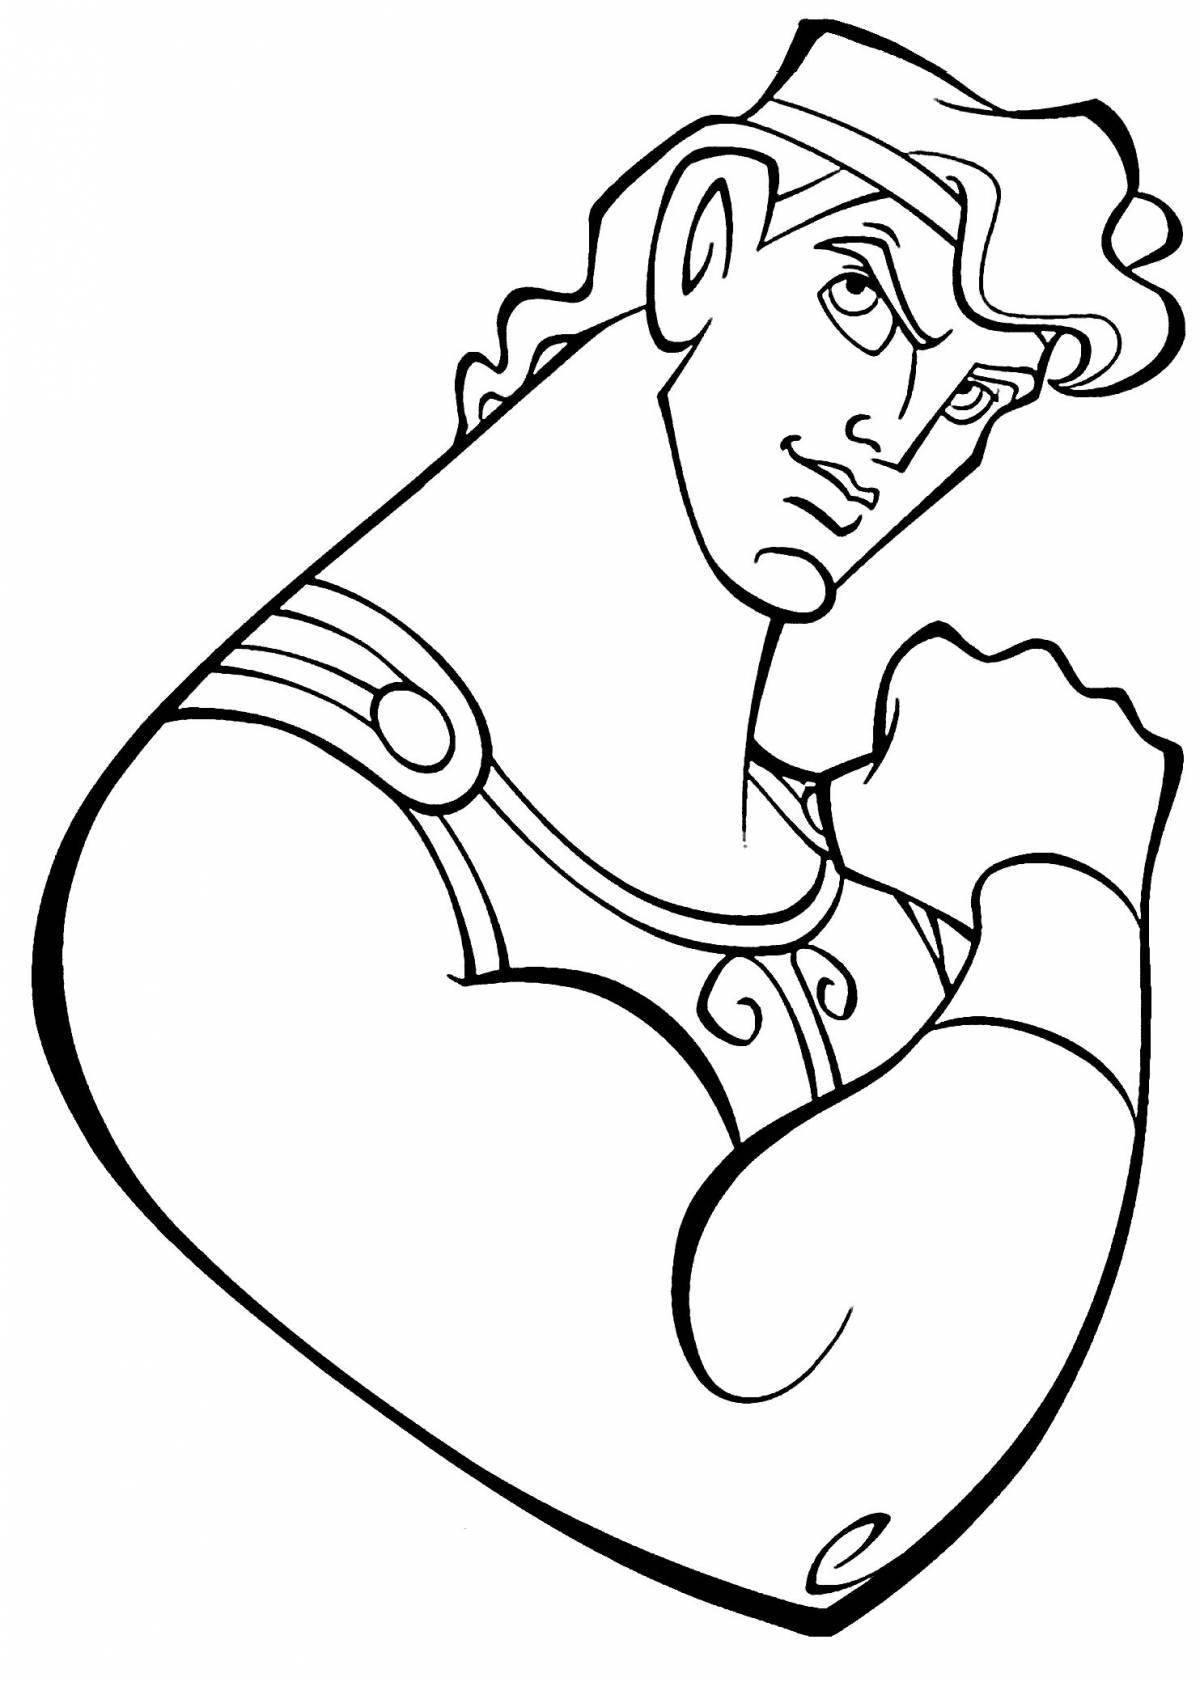 Brightly colored hercules coloring book